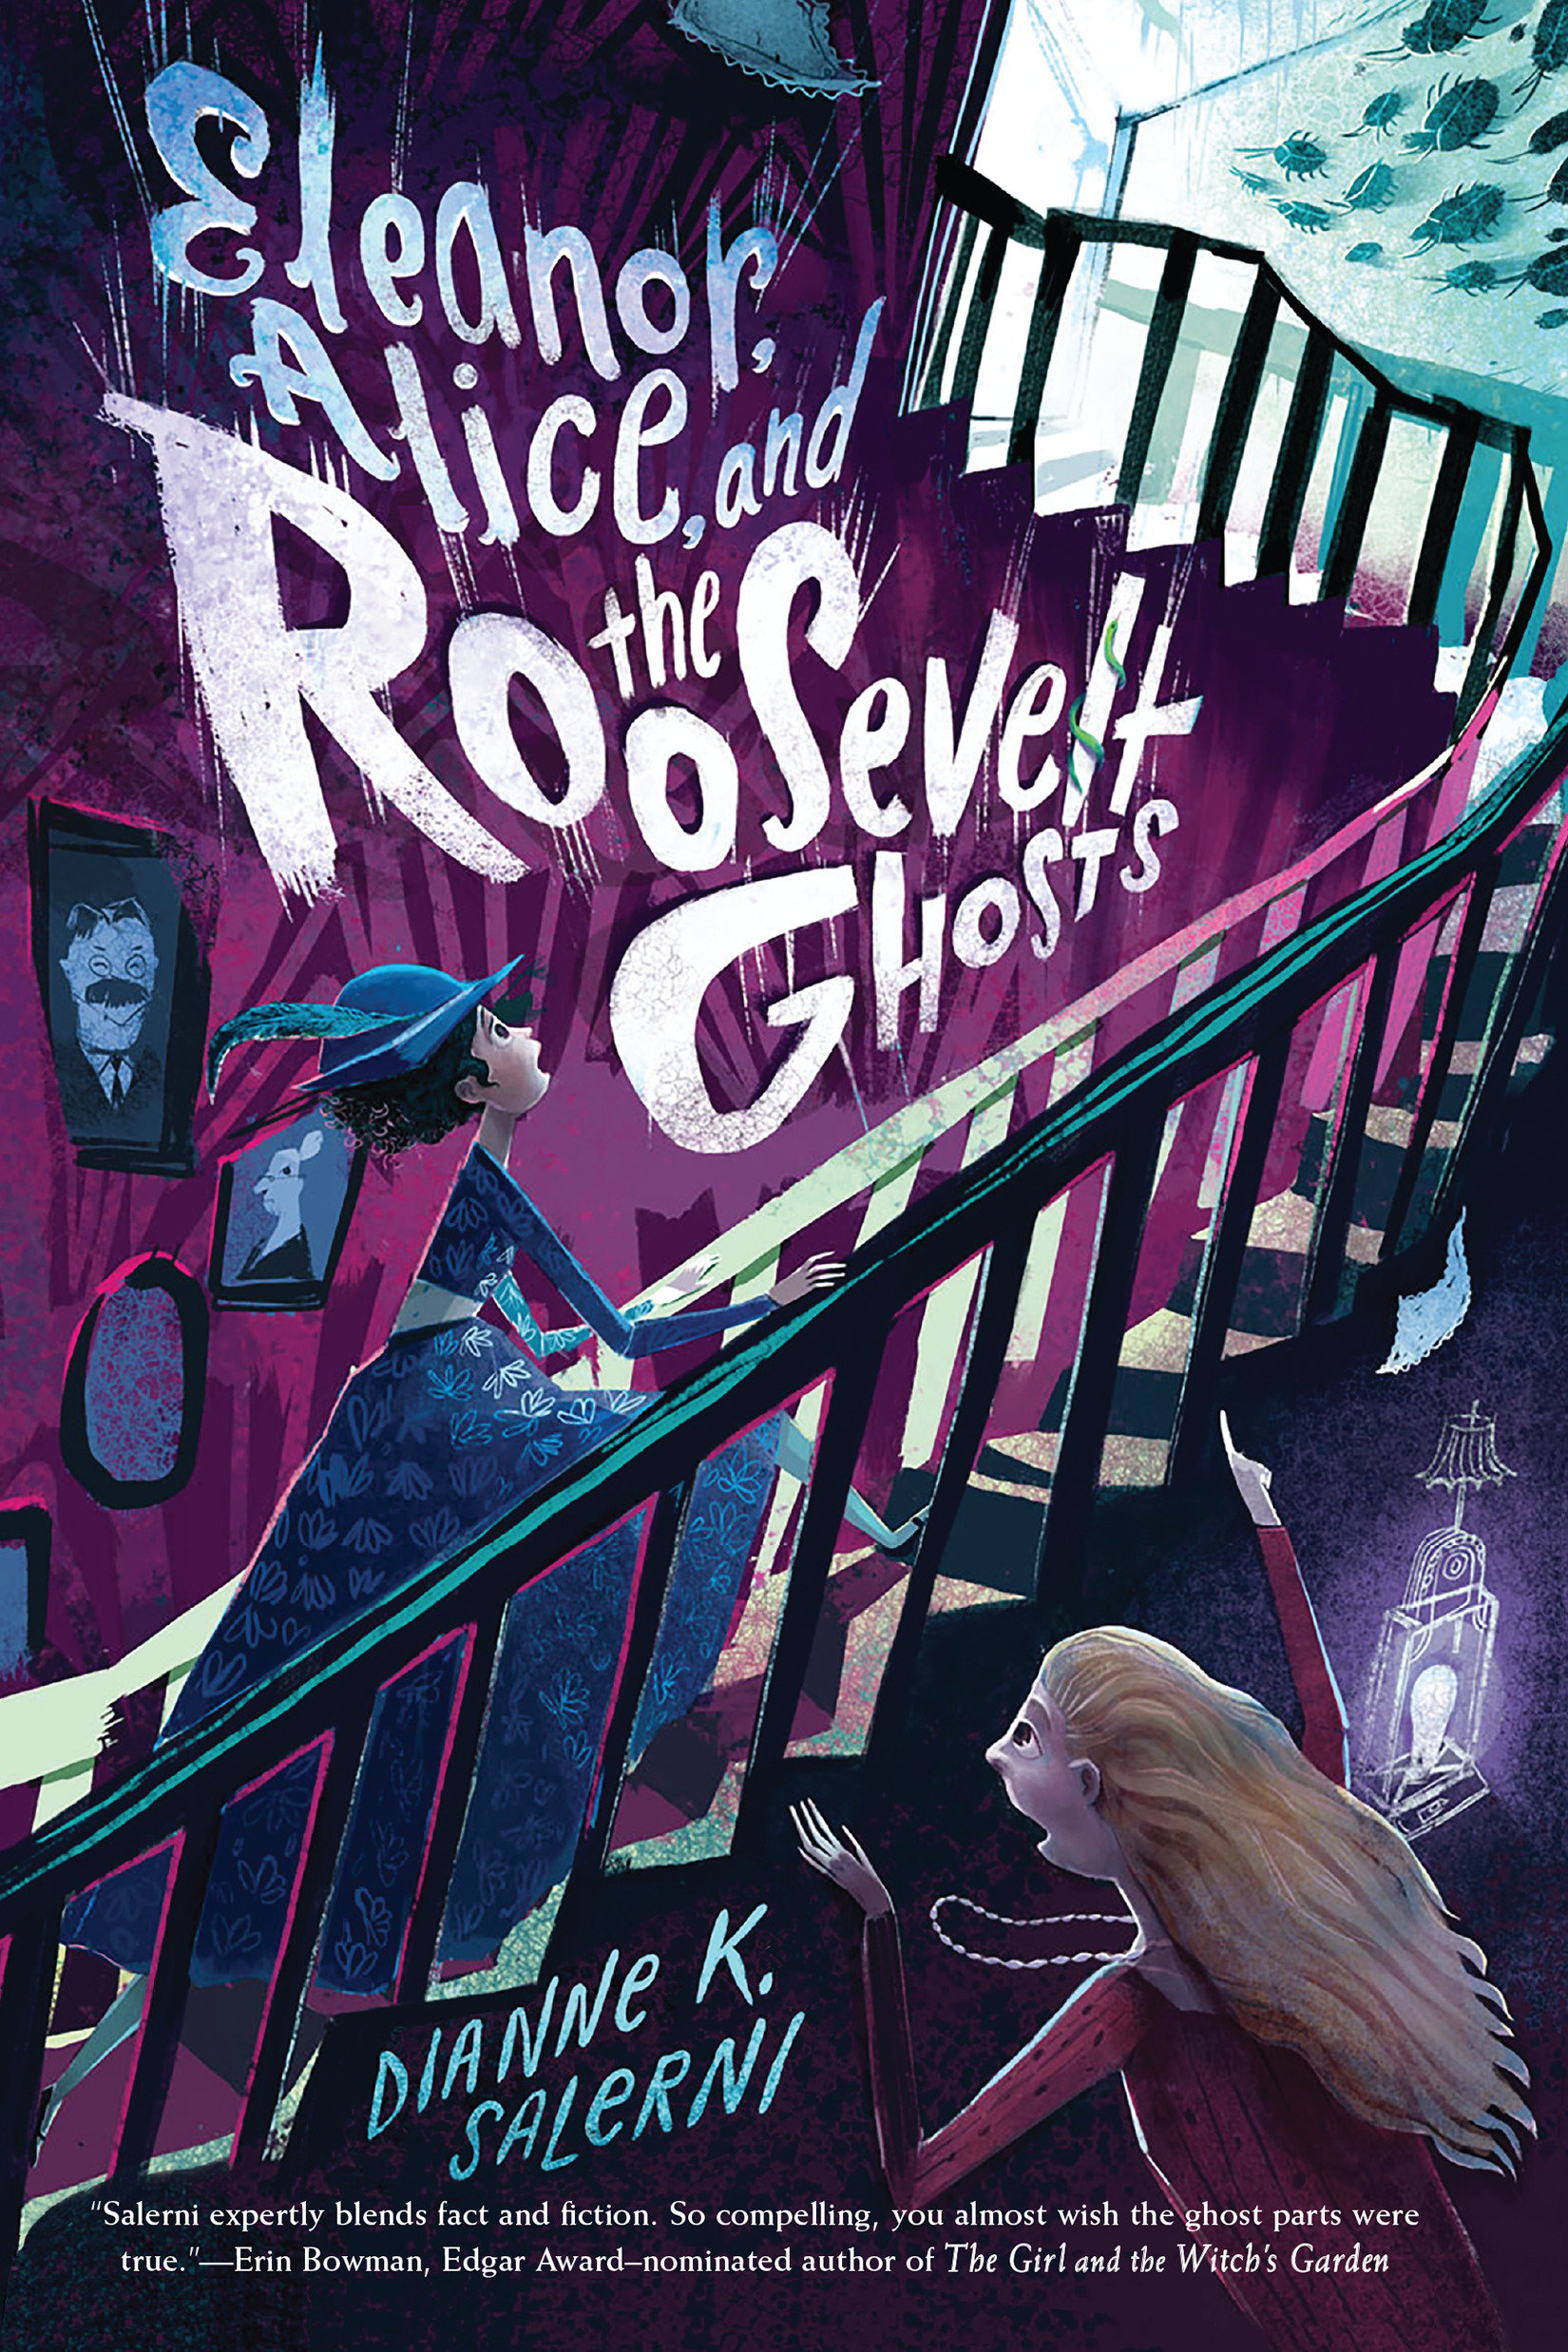 Eleanor, Alice, and the Roosevelt Ghosts (Hardcover Book)